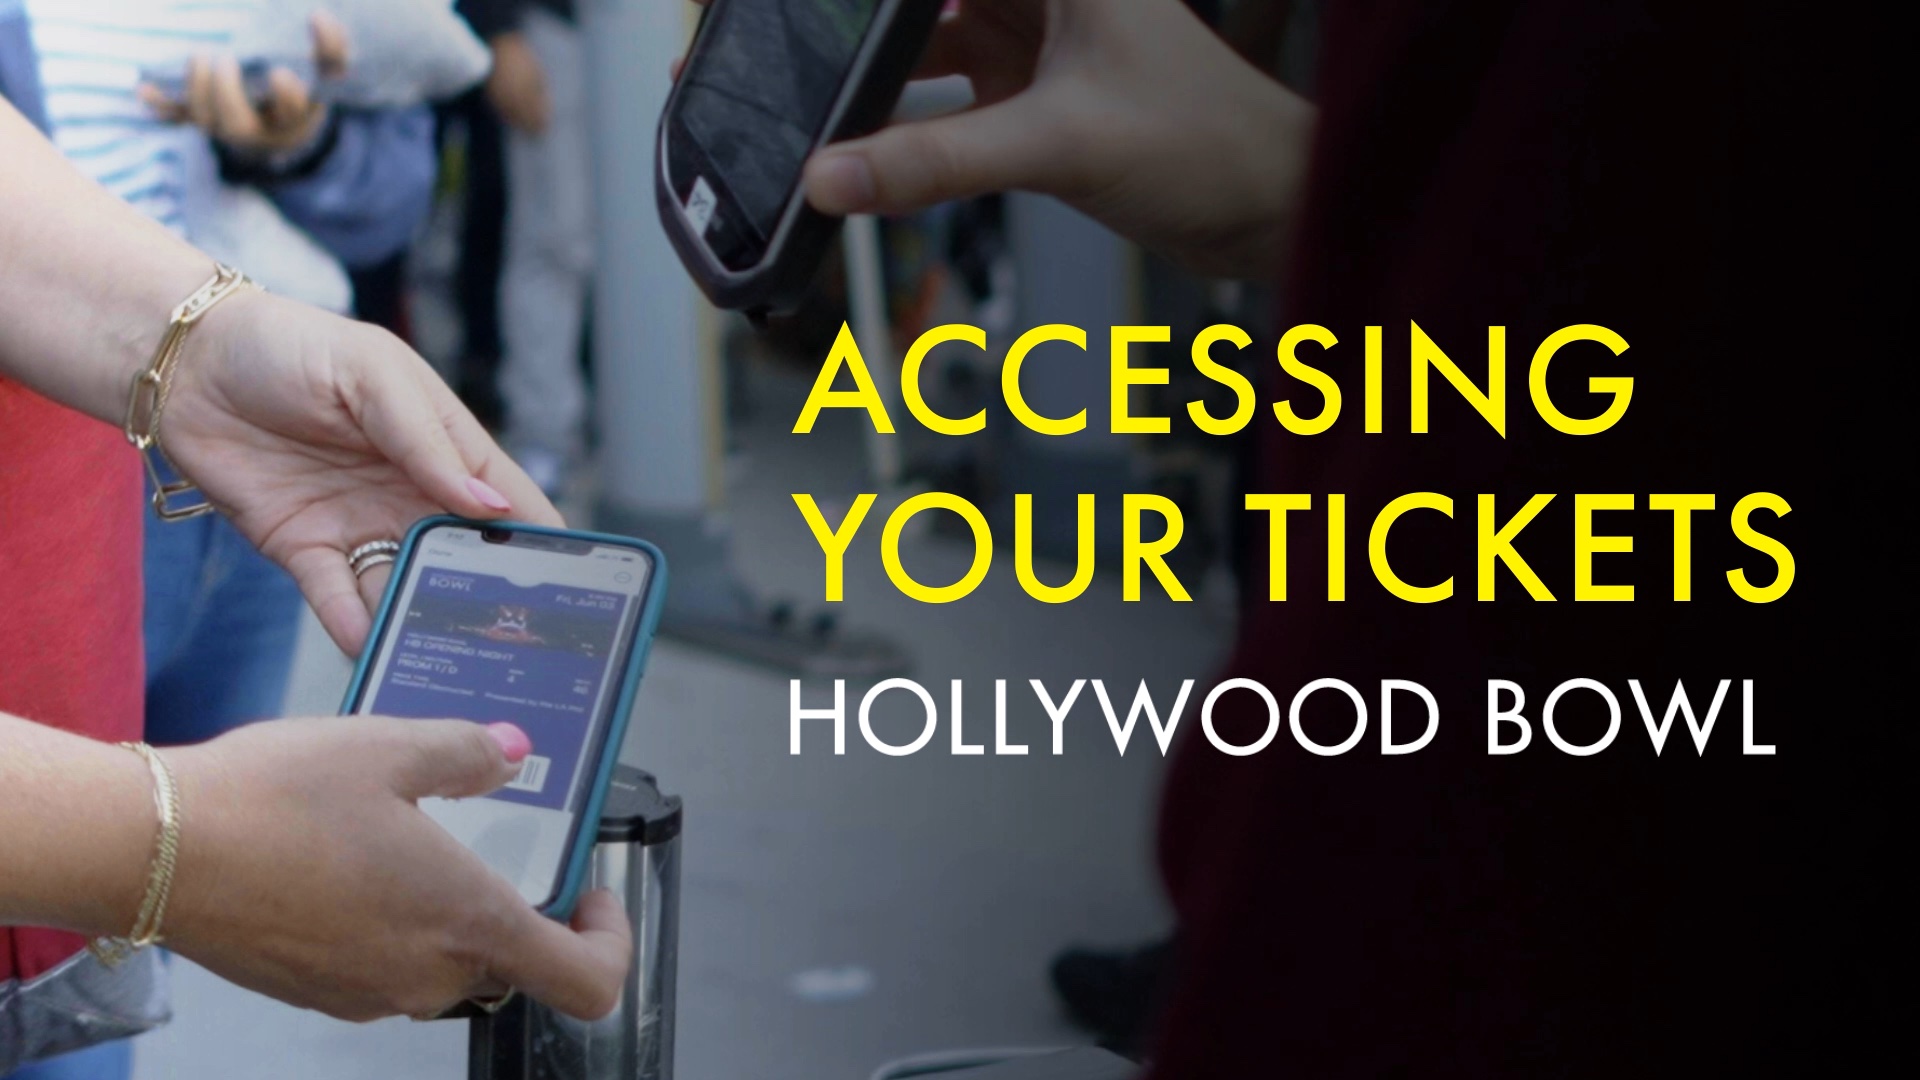 Video about Accessing Your Tickets on the Hollywood Bowl App